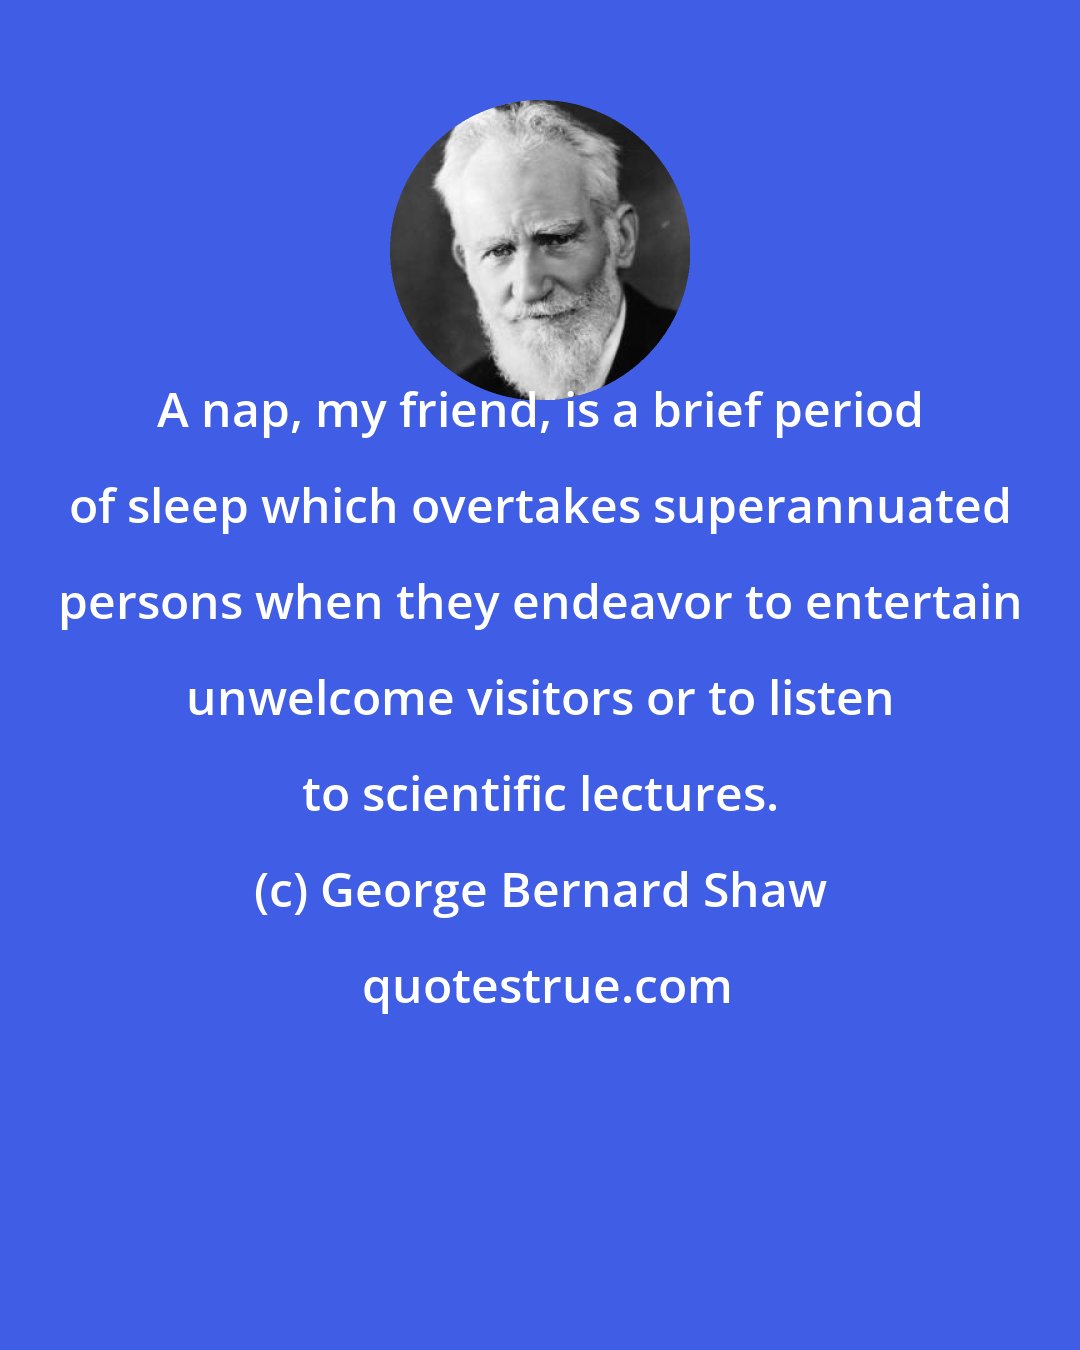 George Bernard Shaw: A nap, my friend, is a brief period of sleep which overtakes superannuated persons when they endeavor to entertain unwelcome visitors or to listen to scientific lectures.